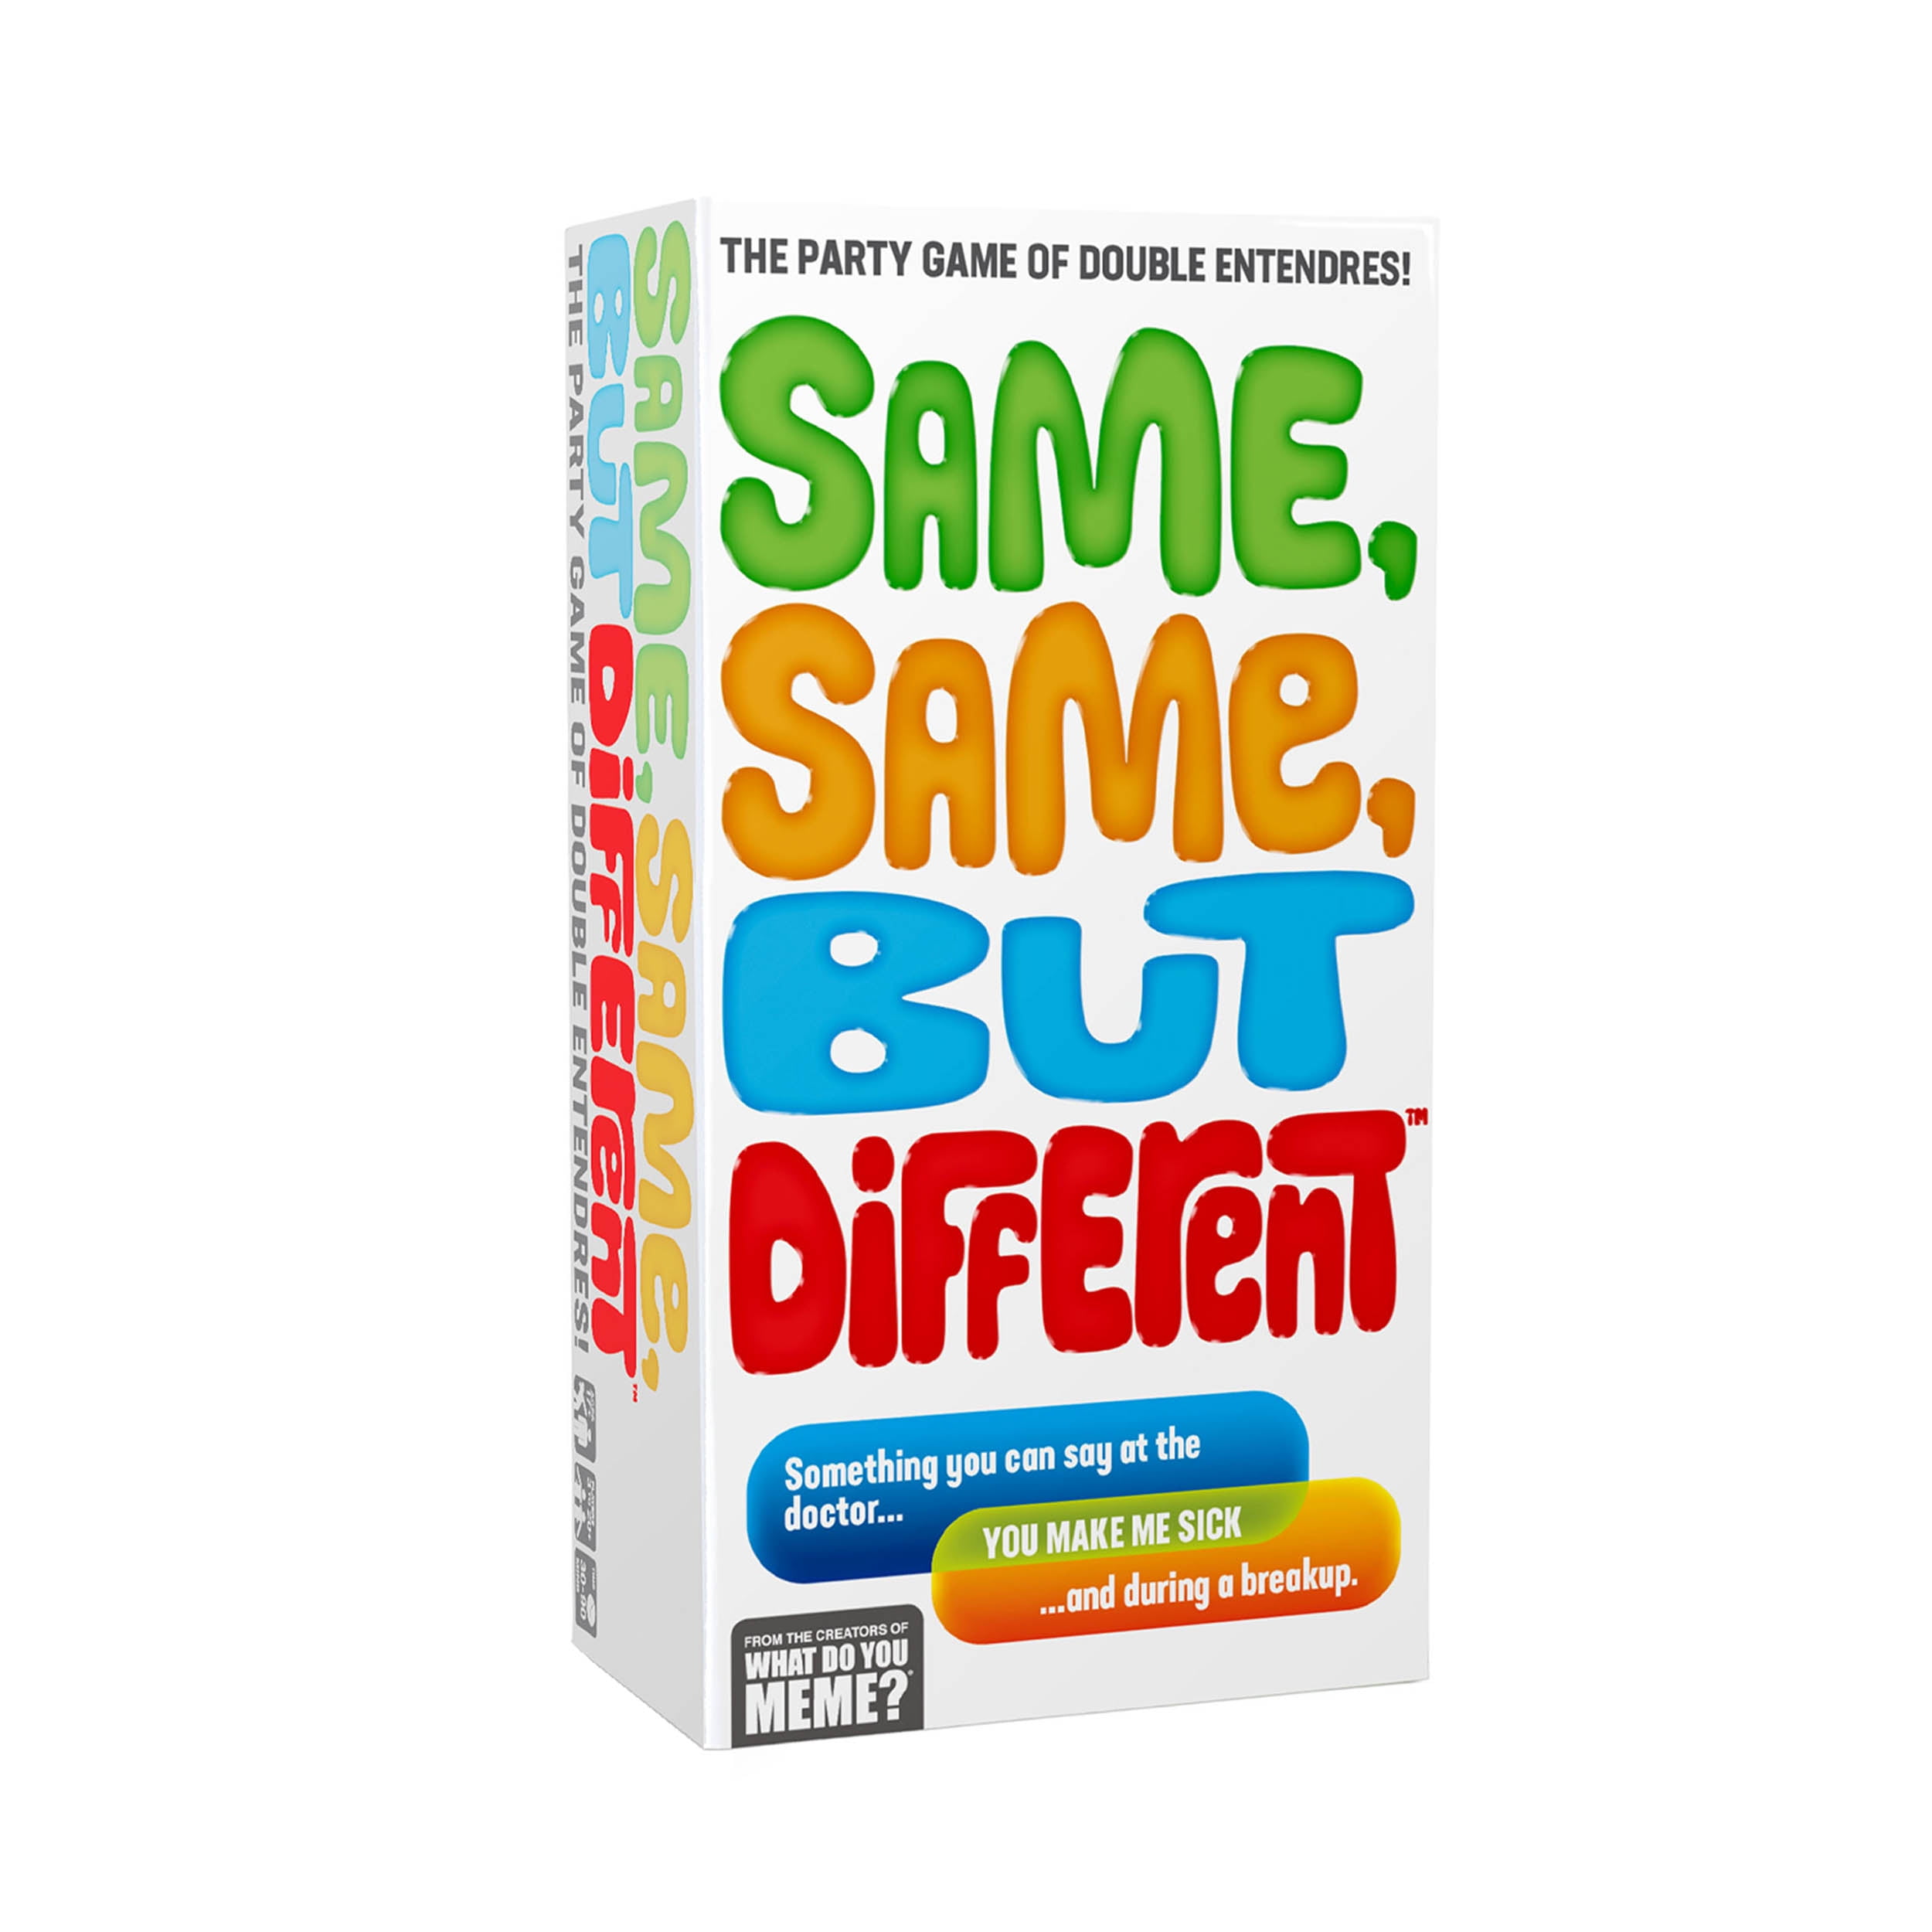 Same Same But Different - The Hilarious Party Game of Double Entendres by What Do You Meme?